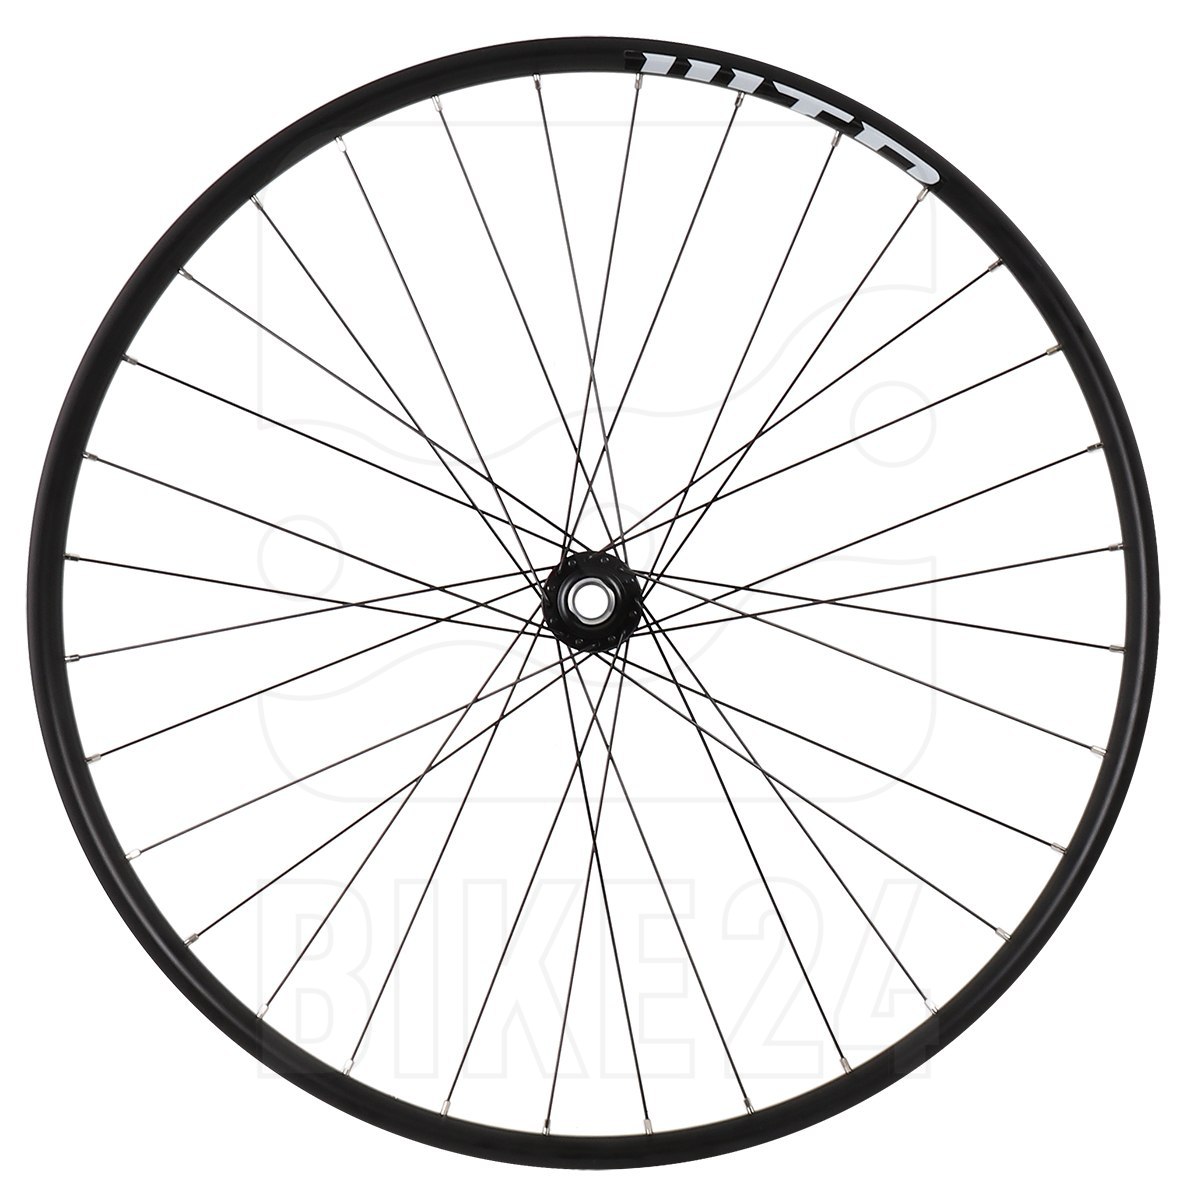 Picture of Shimano | WTB - Deore XT HB-M8000 | ST i25 - 29 Inch Front Wheel - Centerlock - QR